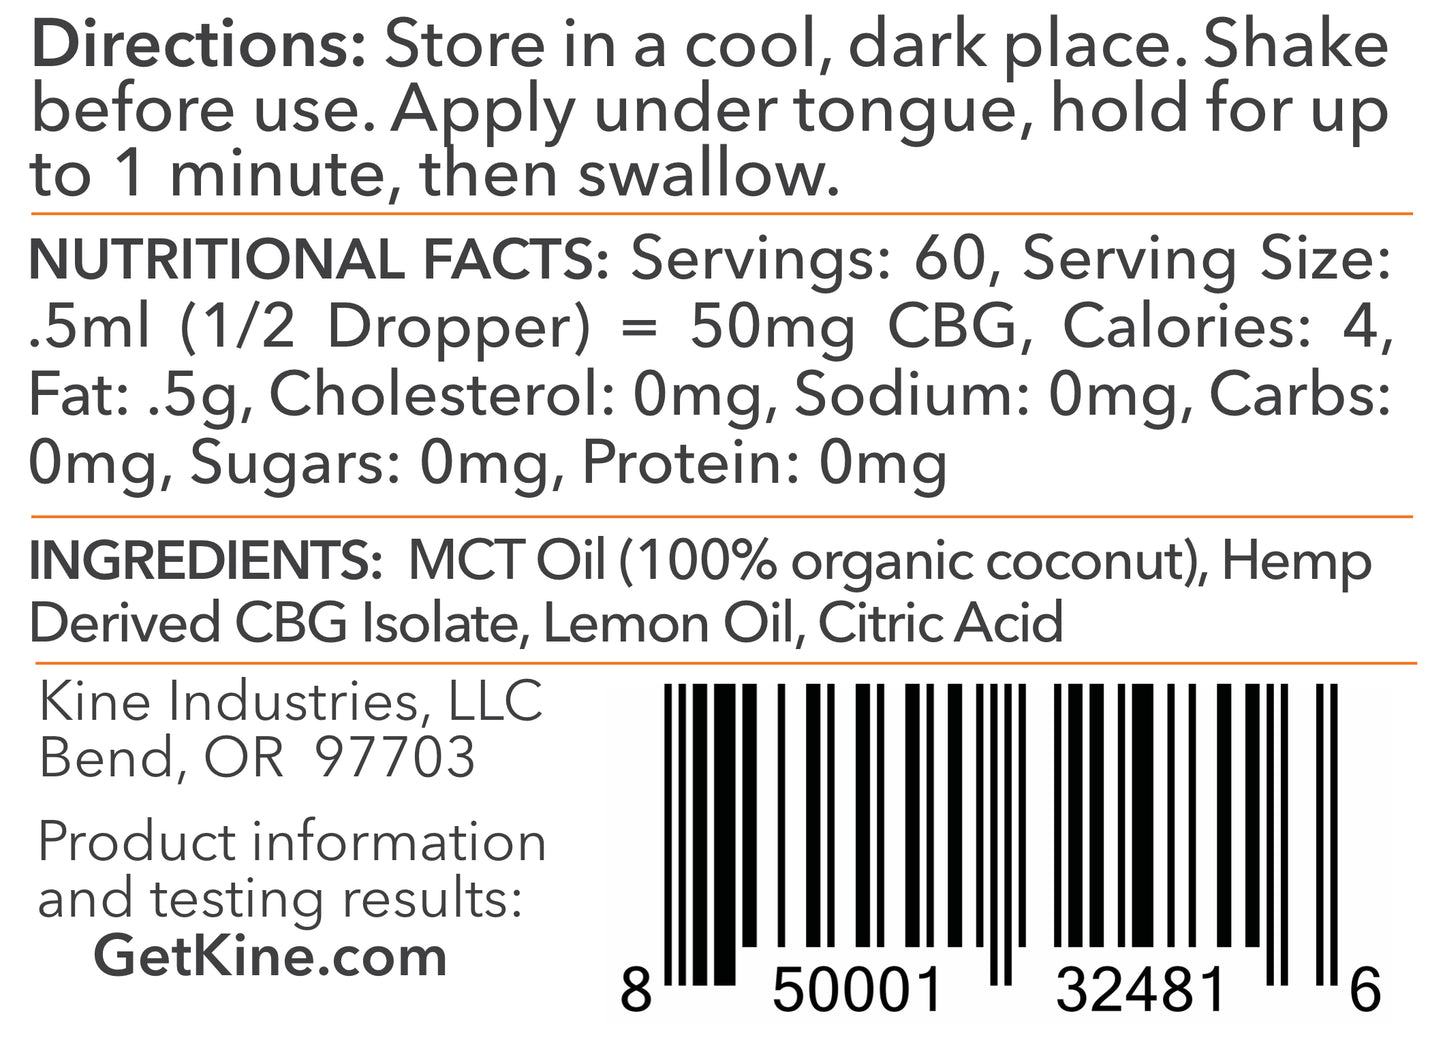 Kine Lemon flavored organic CBG 3000mg tincture drops Ingredients List and Nutritional Facts